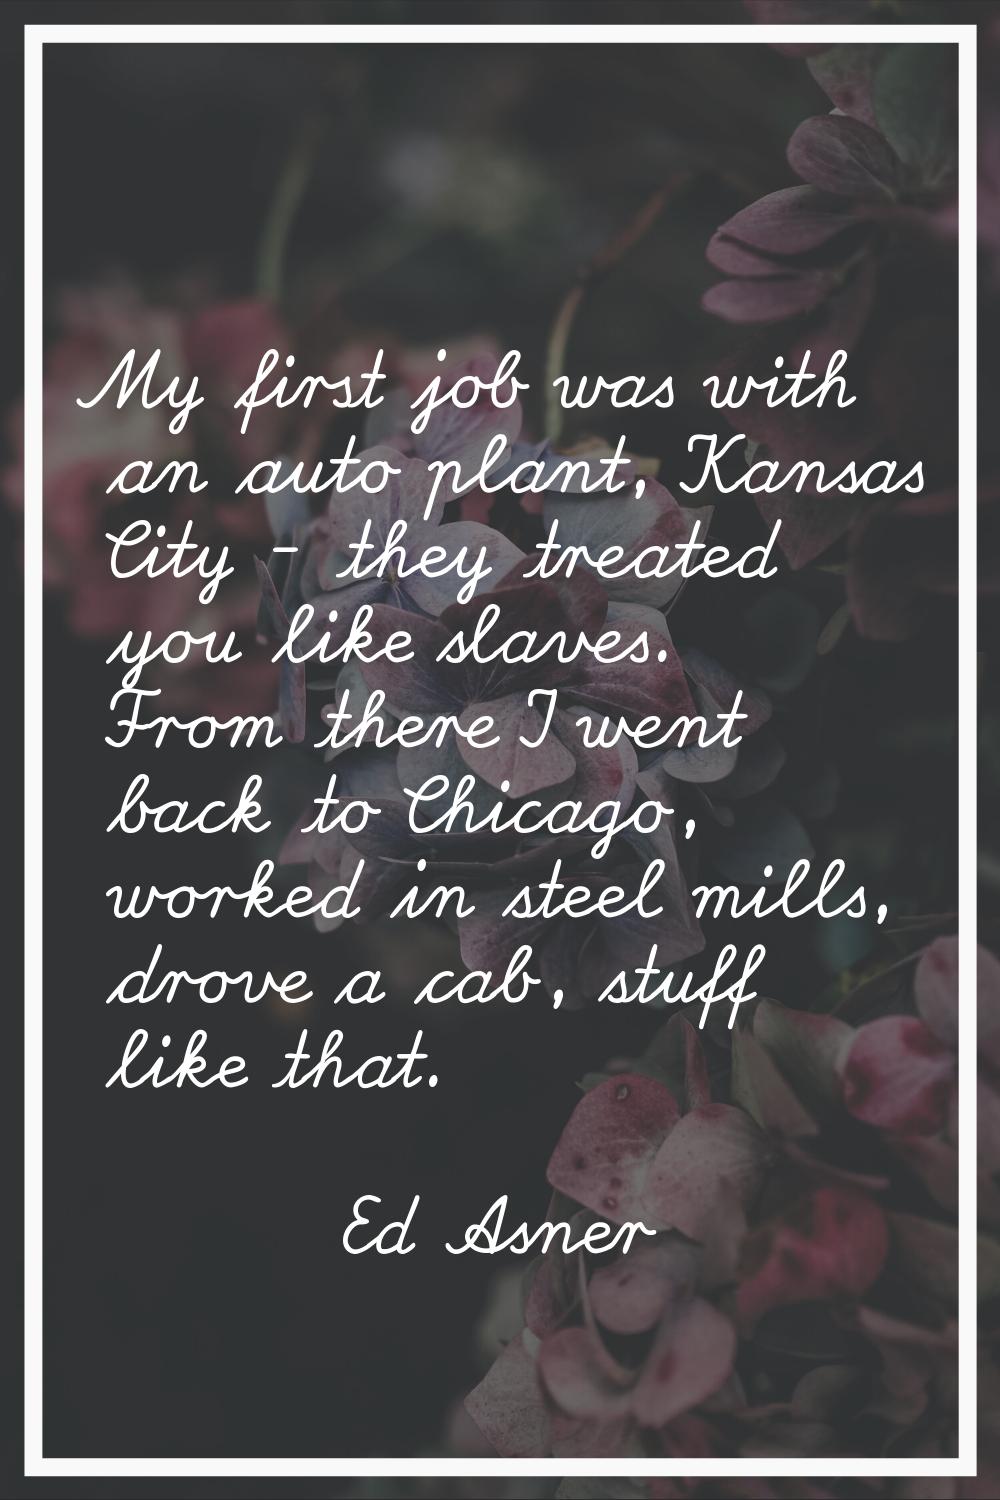 My first job was with an auto plant, Kansas City - they treated you like slaves. From there I went 